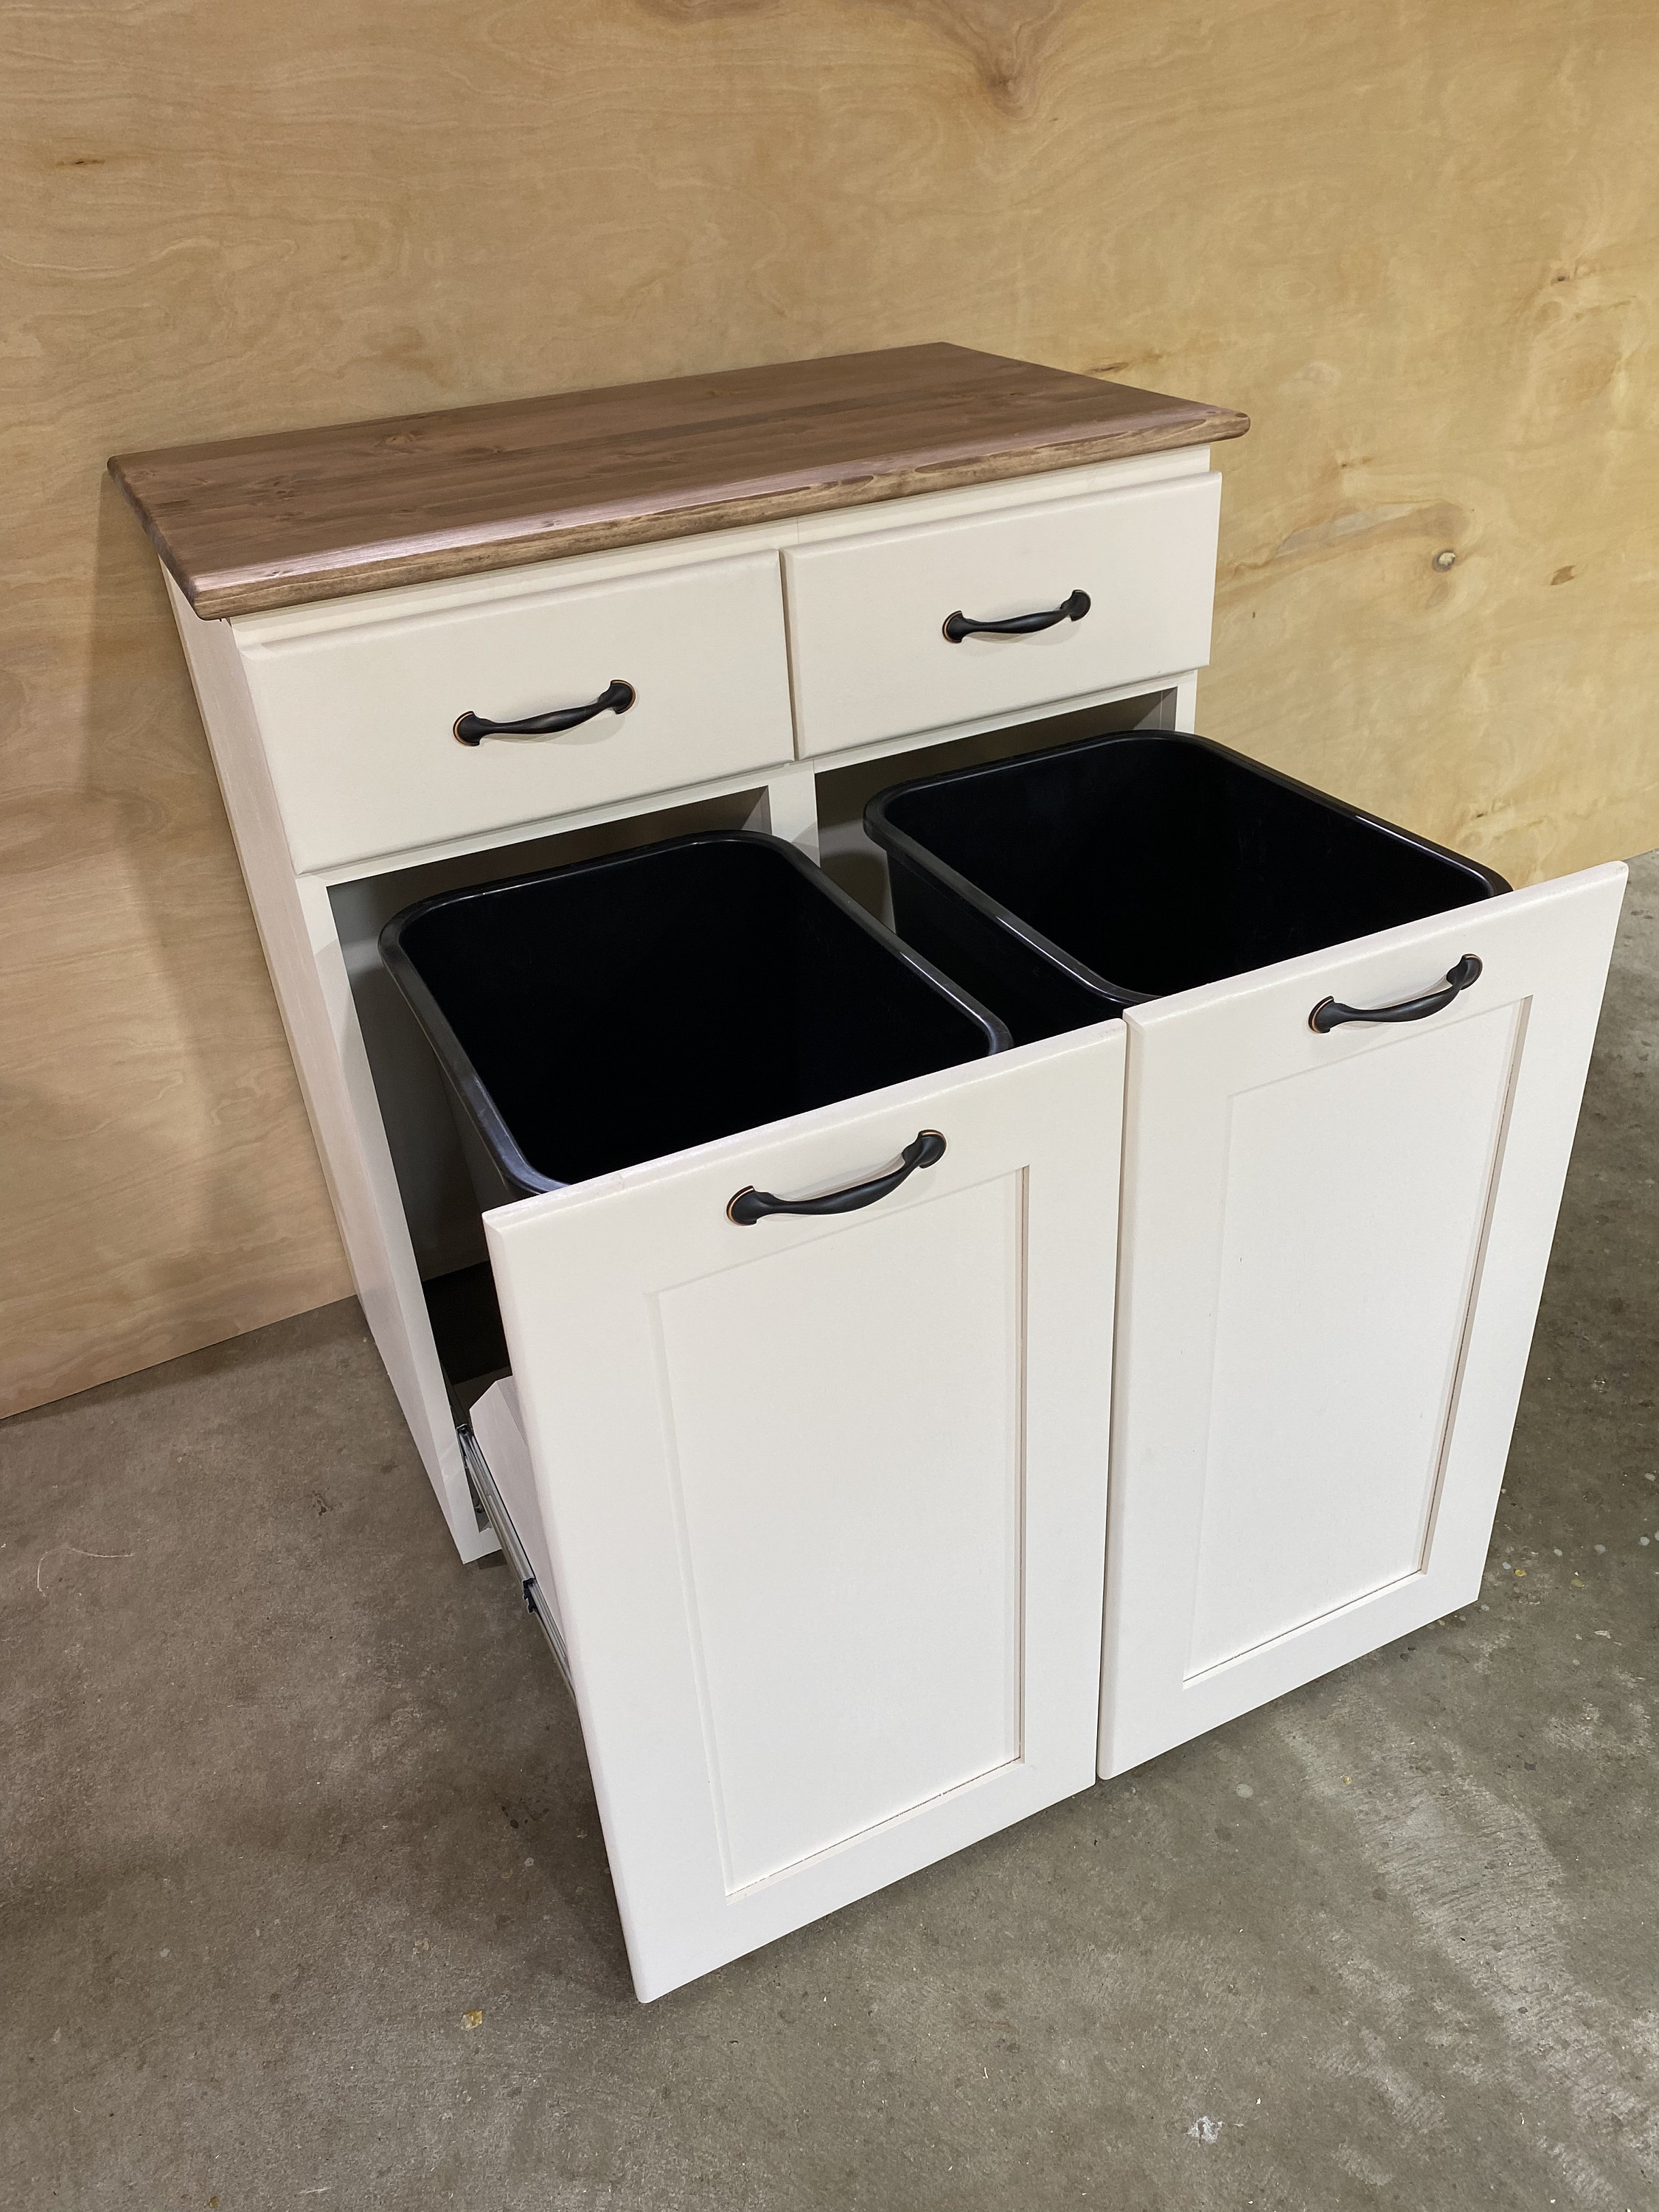 White Double Tilt Out Trash Can Cabinet Holder Kitchen Garbage Laundry  Sorter